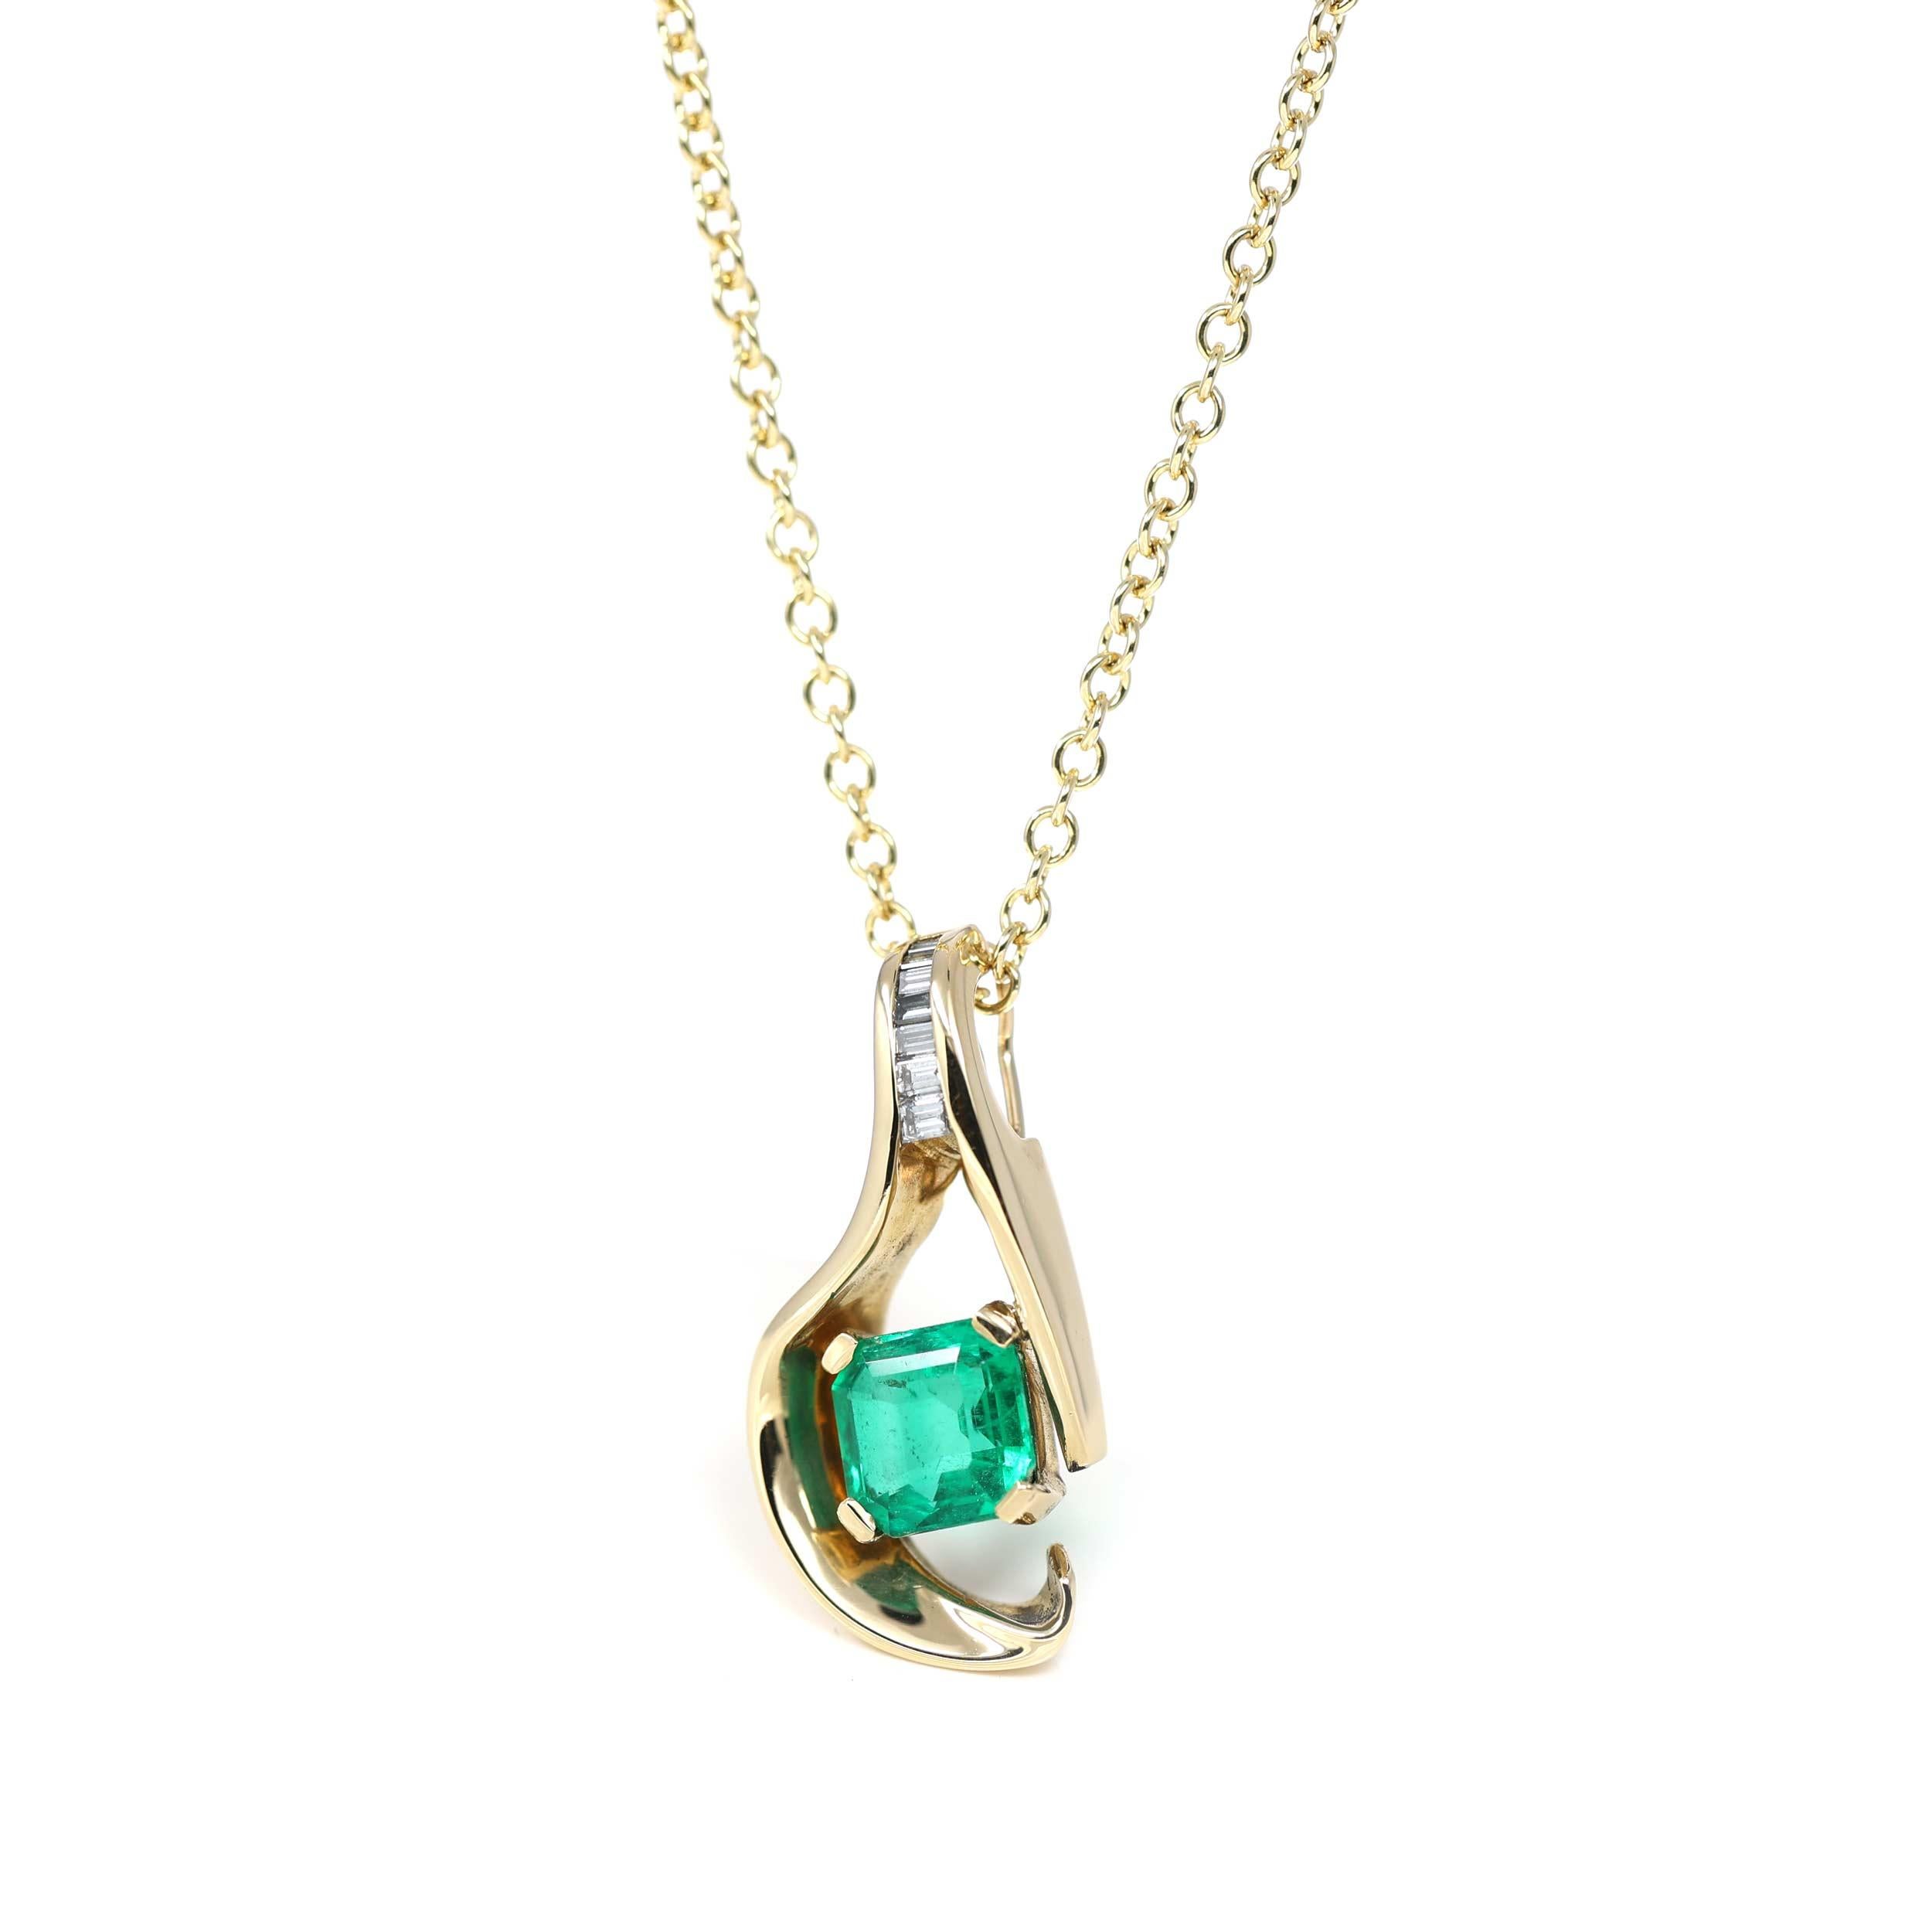 One of A Kind Emerald Necklace. Appraisal and GIA lab report available for the center emerald. Set in exquisite 18k yellow gold free form setting. Perfect for an emerald lover. 